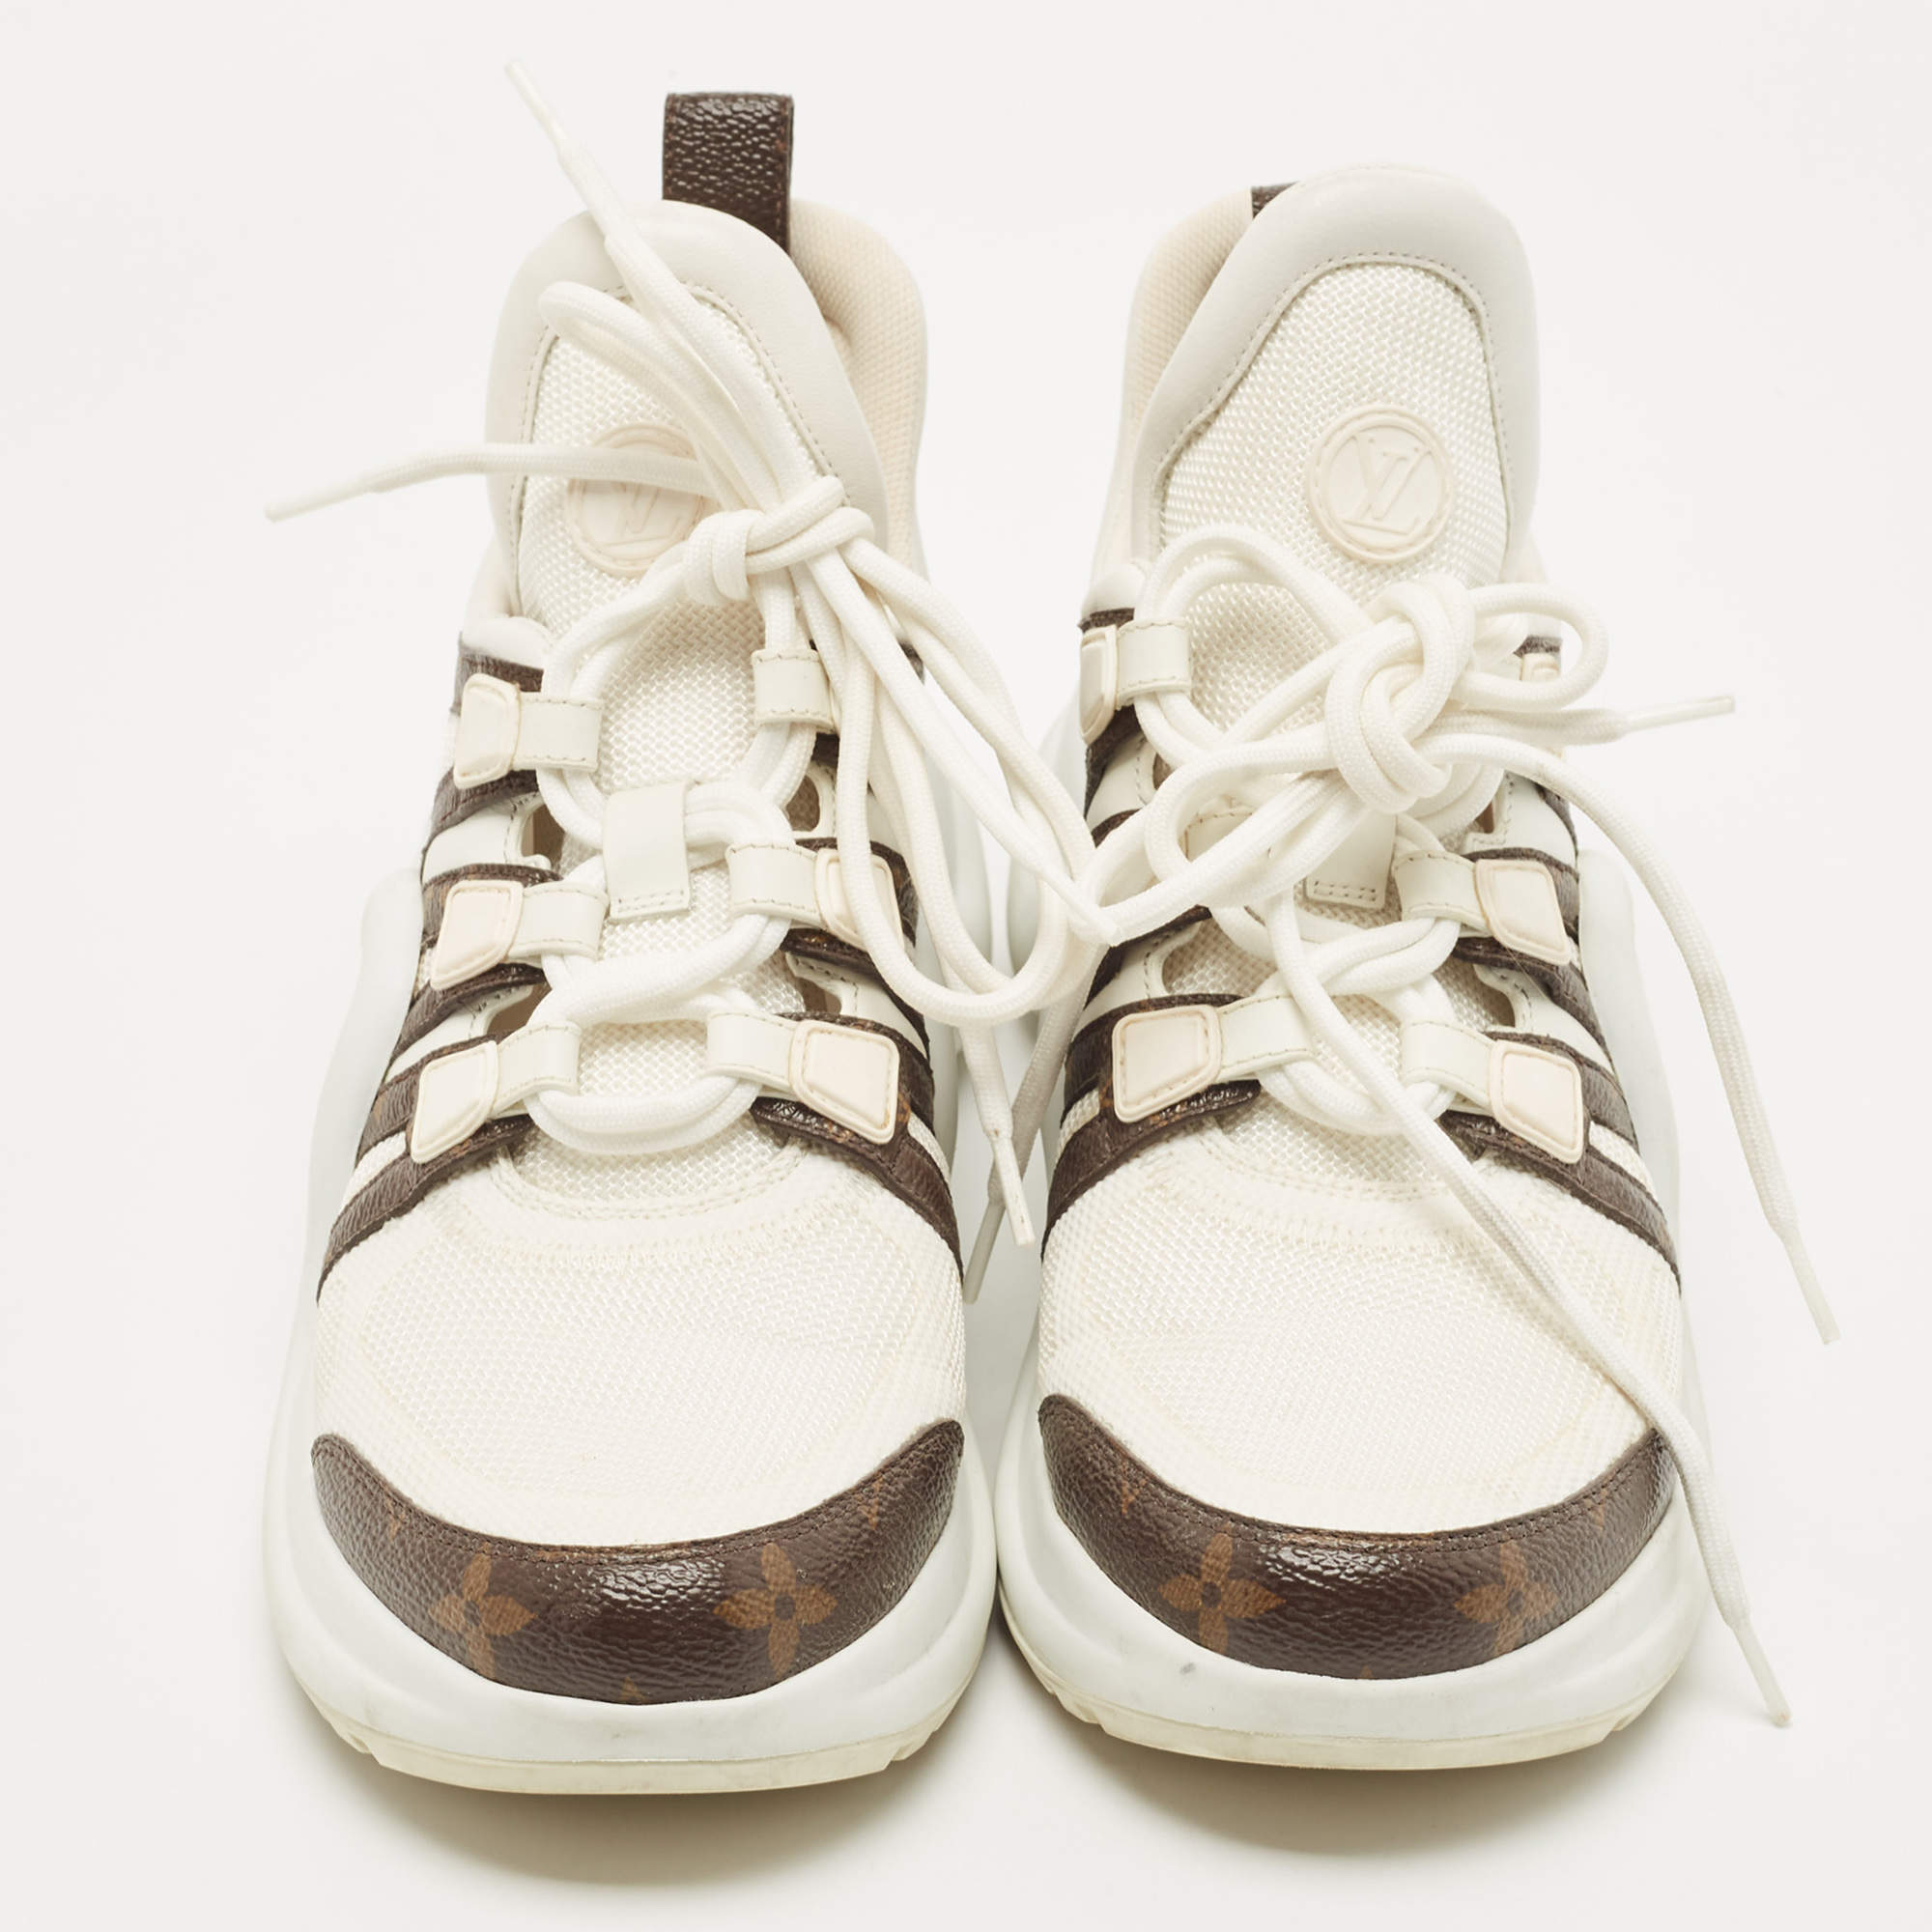 Louis Vuitton ByThePool Archlight Sneakers - Size 38.5 - Couture USA